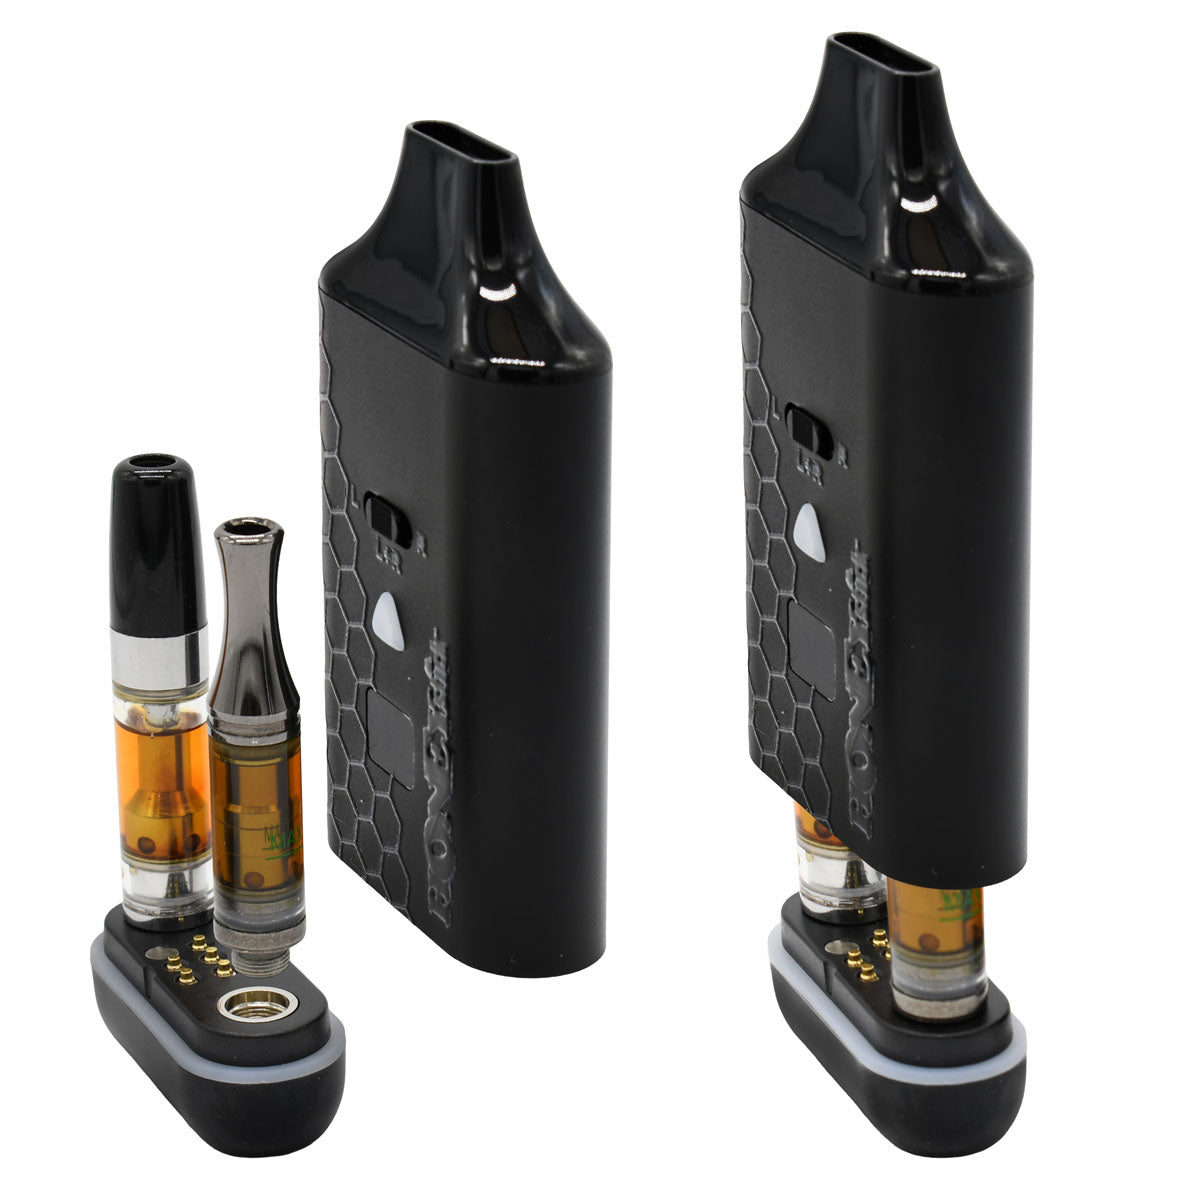 DUO VV Cart Pen - Dual Carts Vape with Variable Voltage